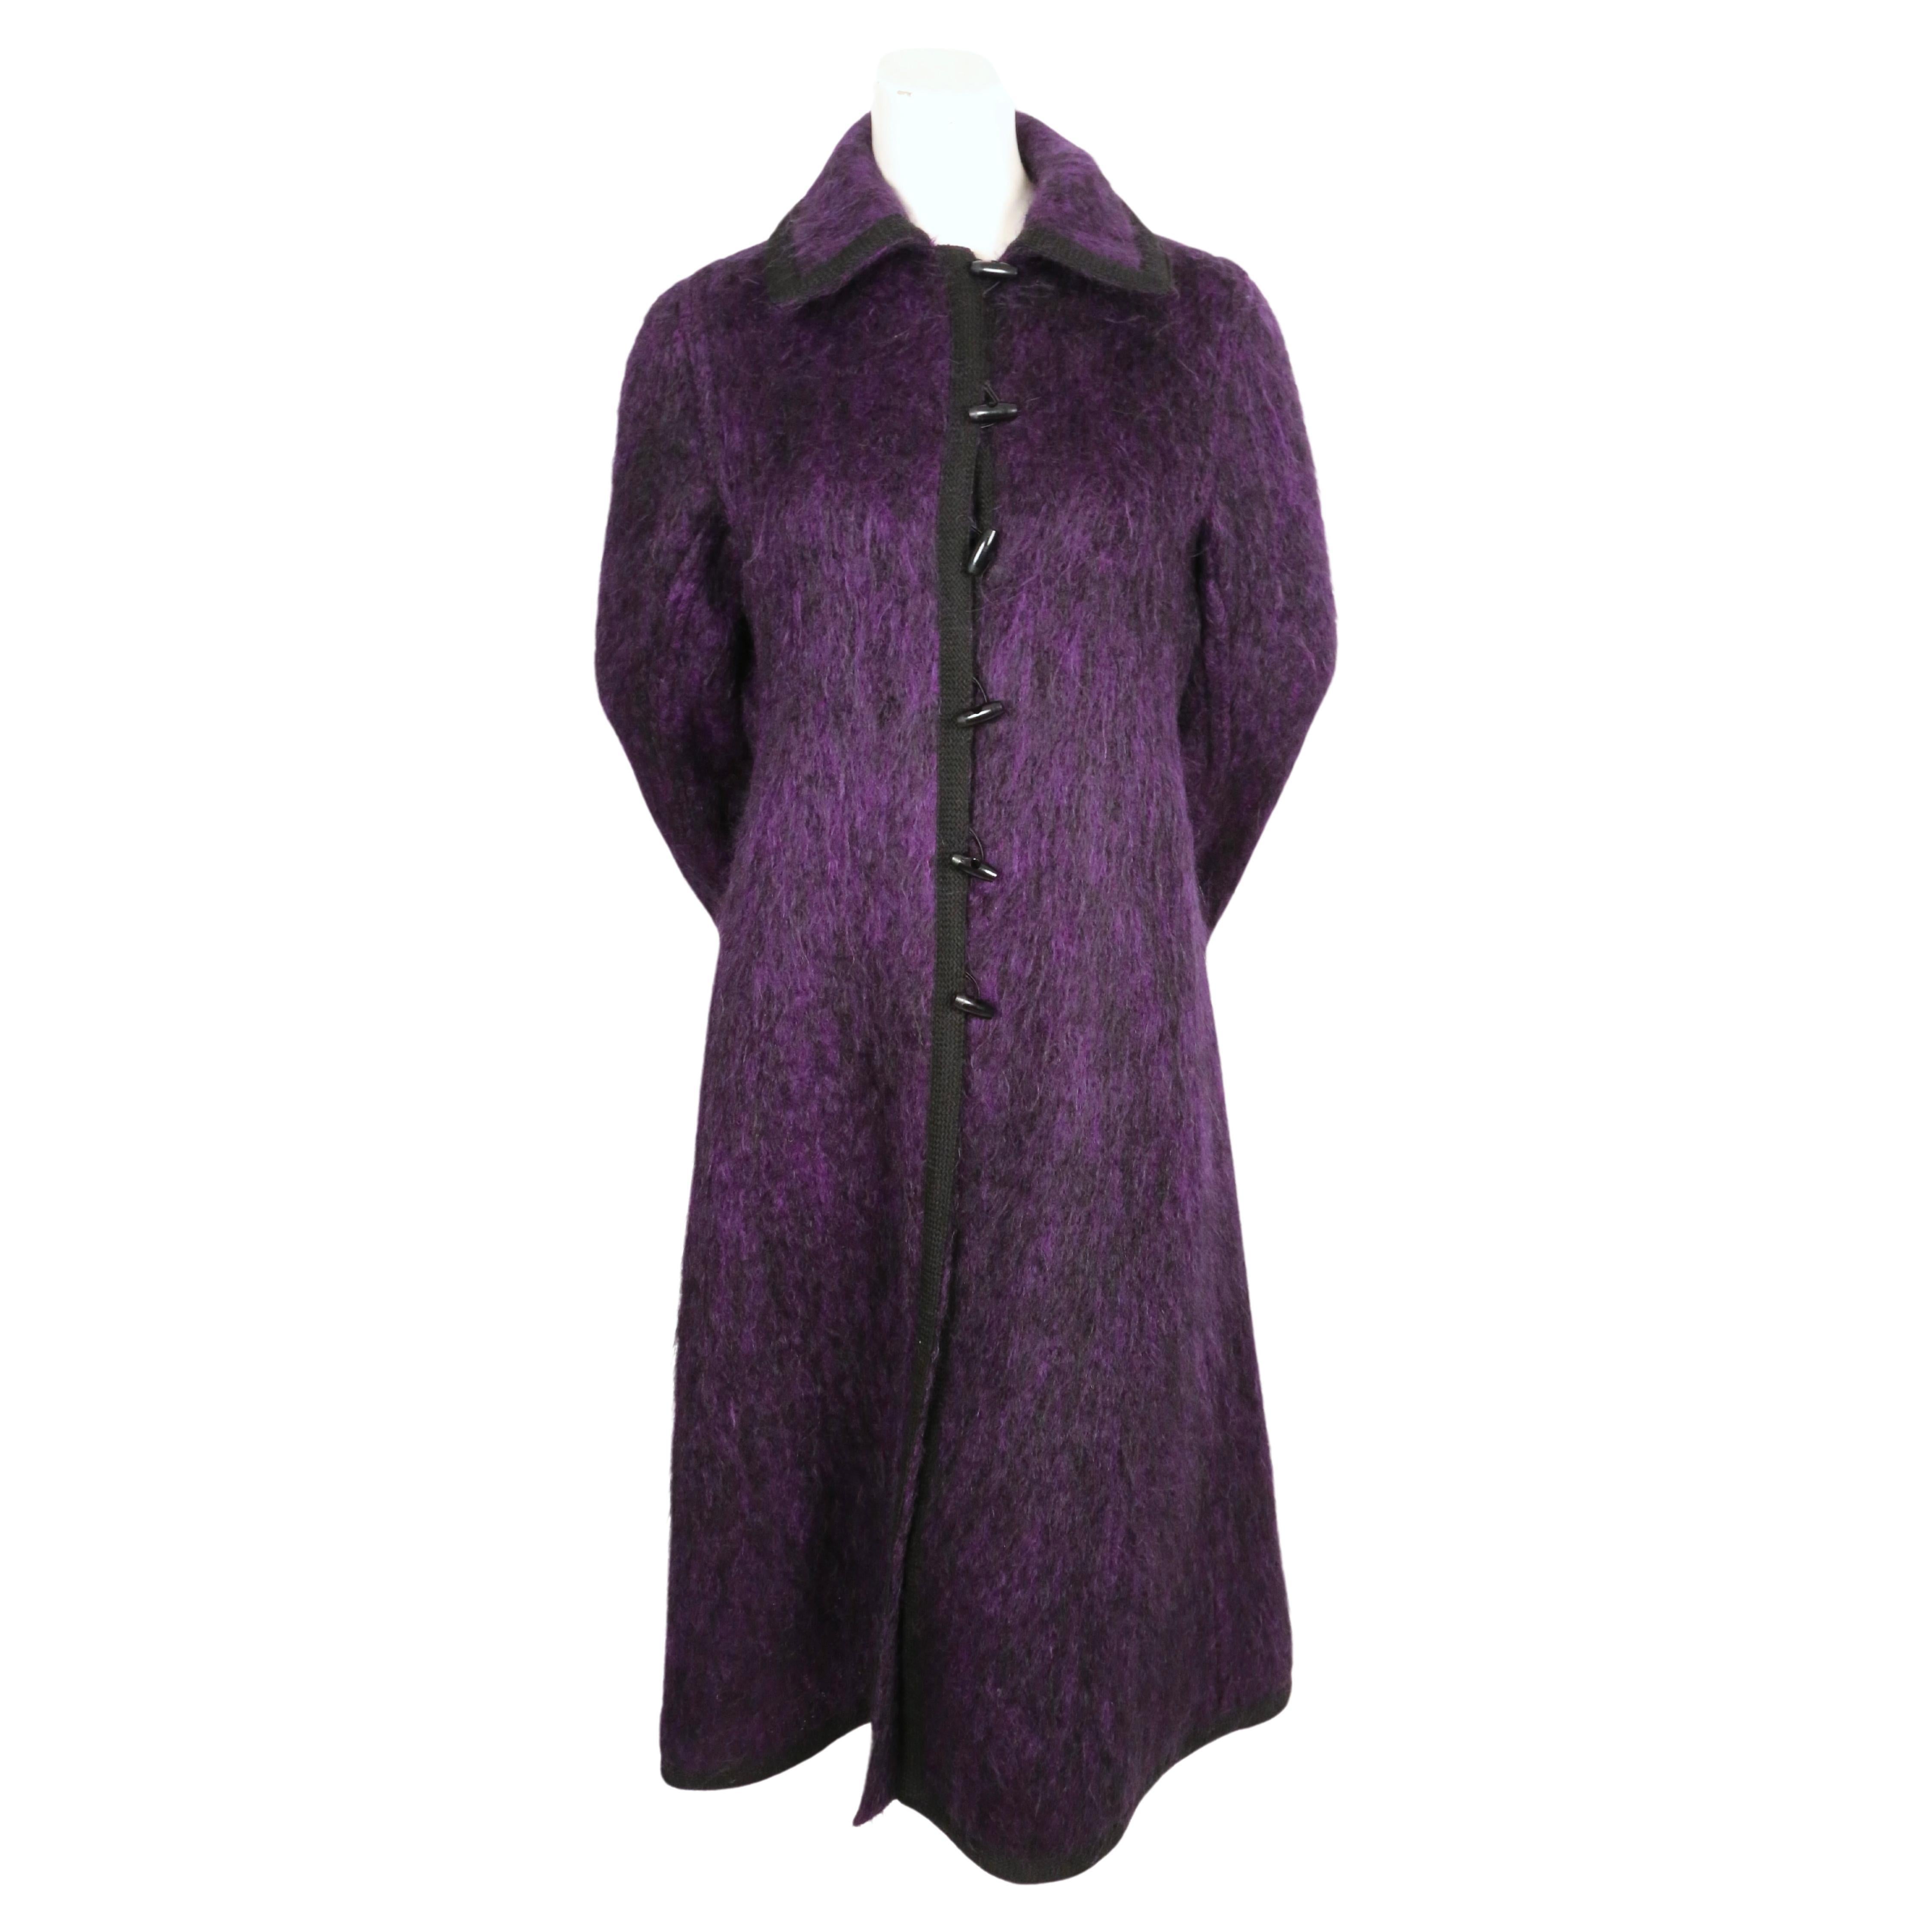 1960's YVES SAINT LAURENT violet purple brushed wool coat with braided trim For Sale